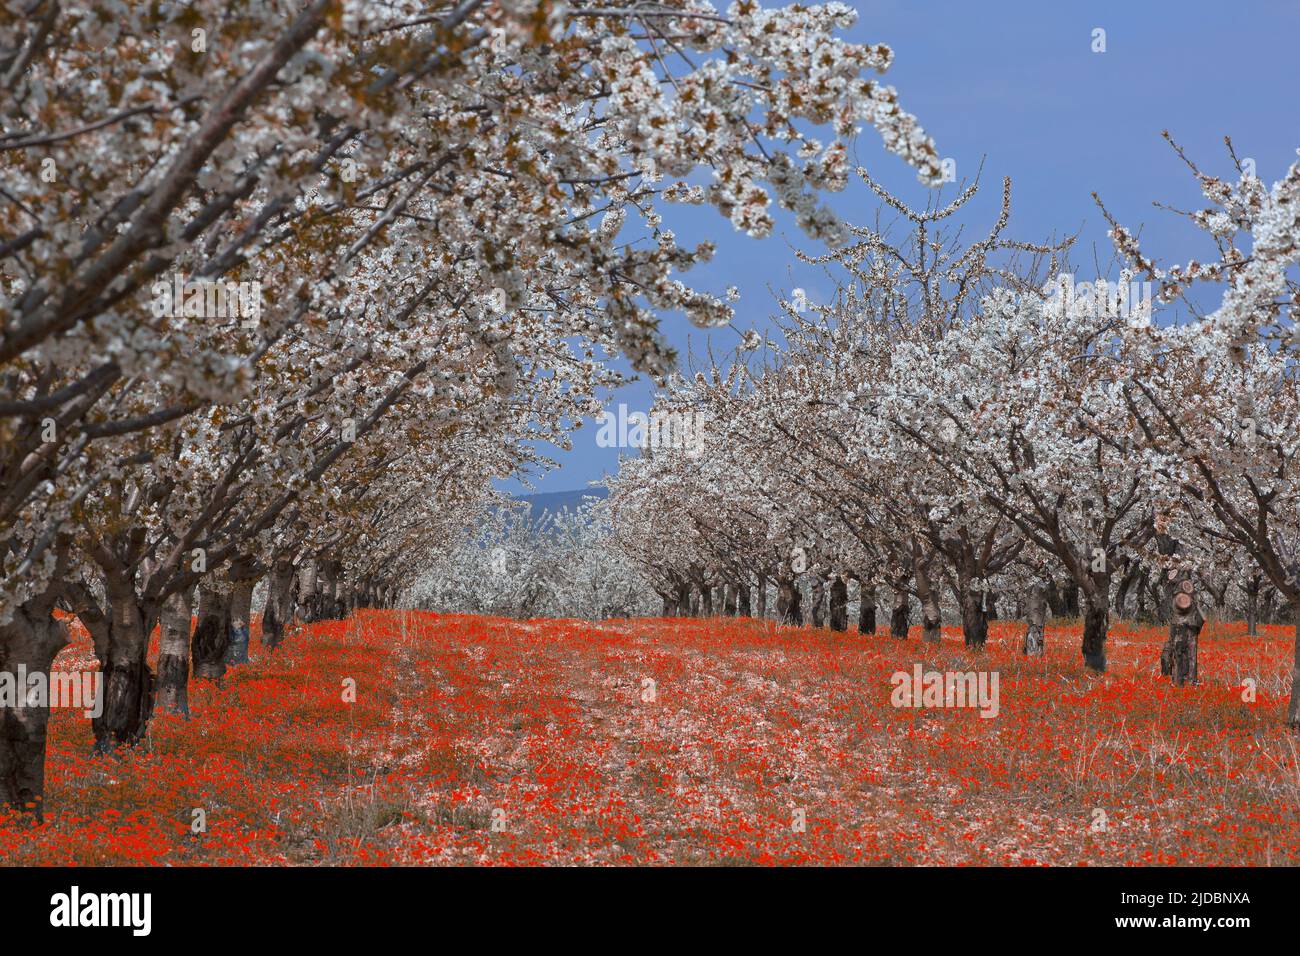 France, Vaucluse Cherry trees, the orchard in bloom Stock Photo